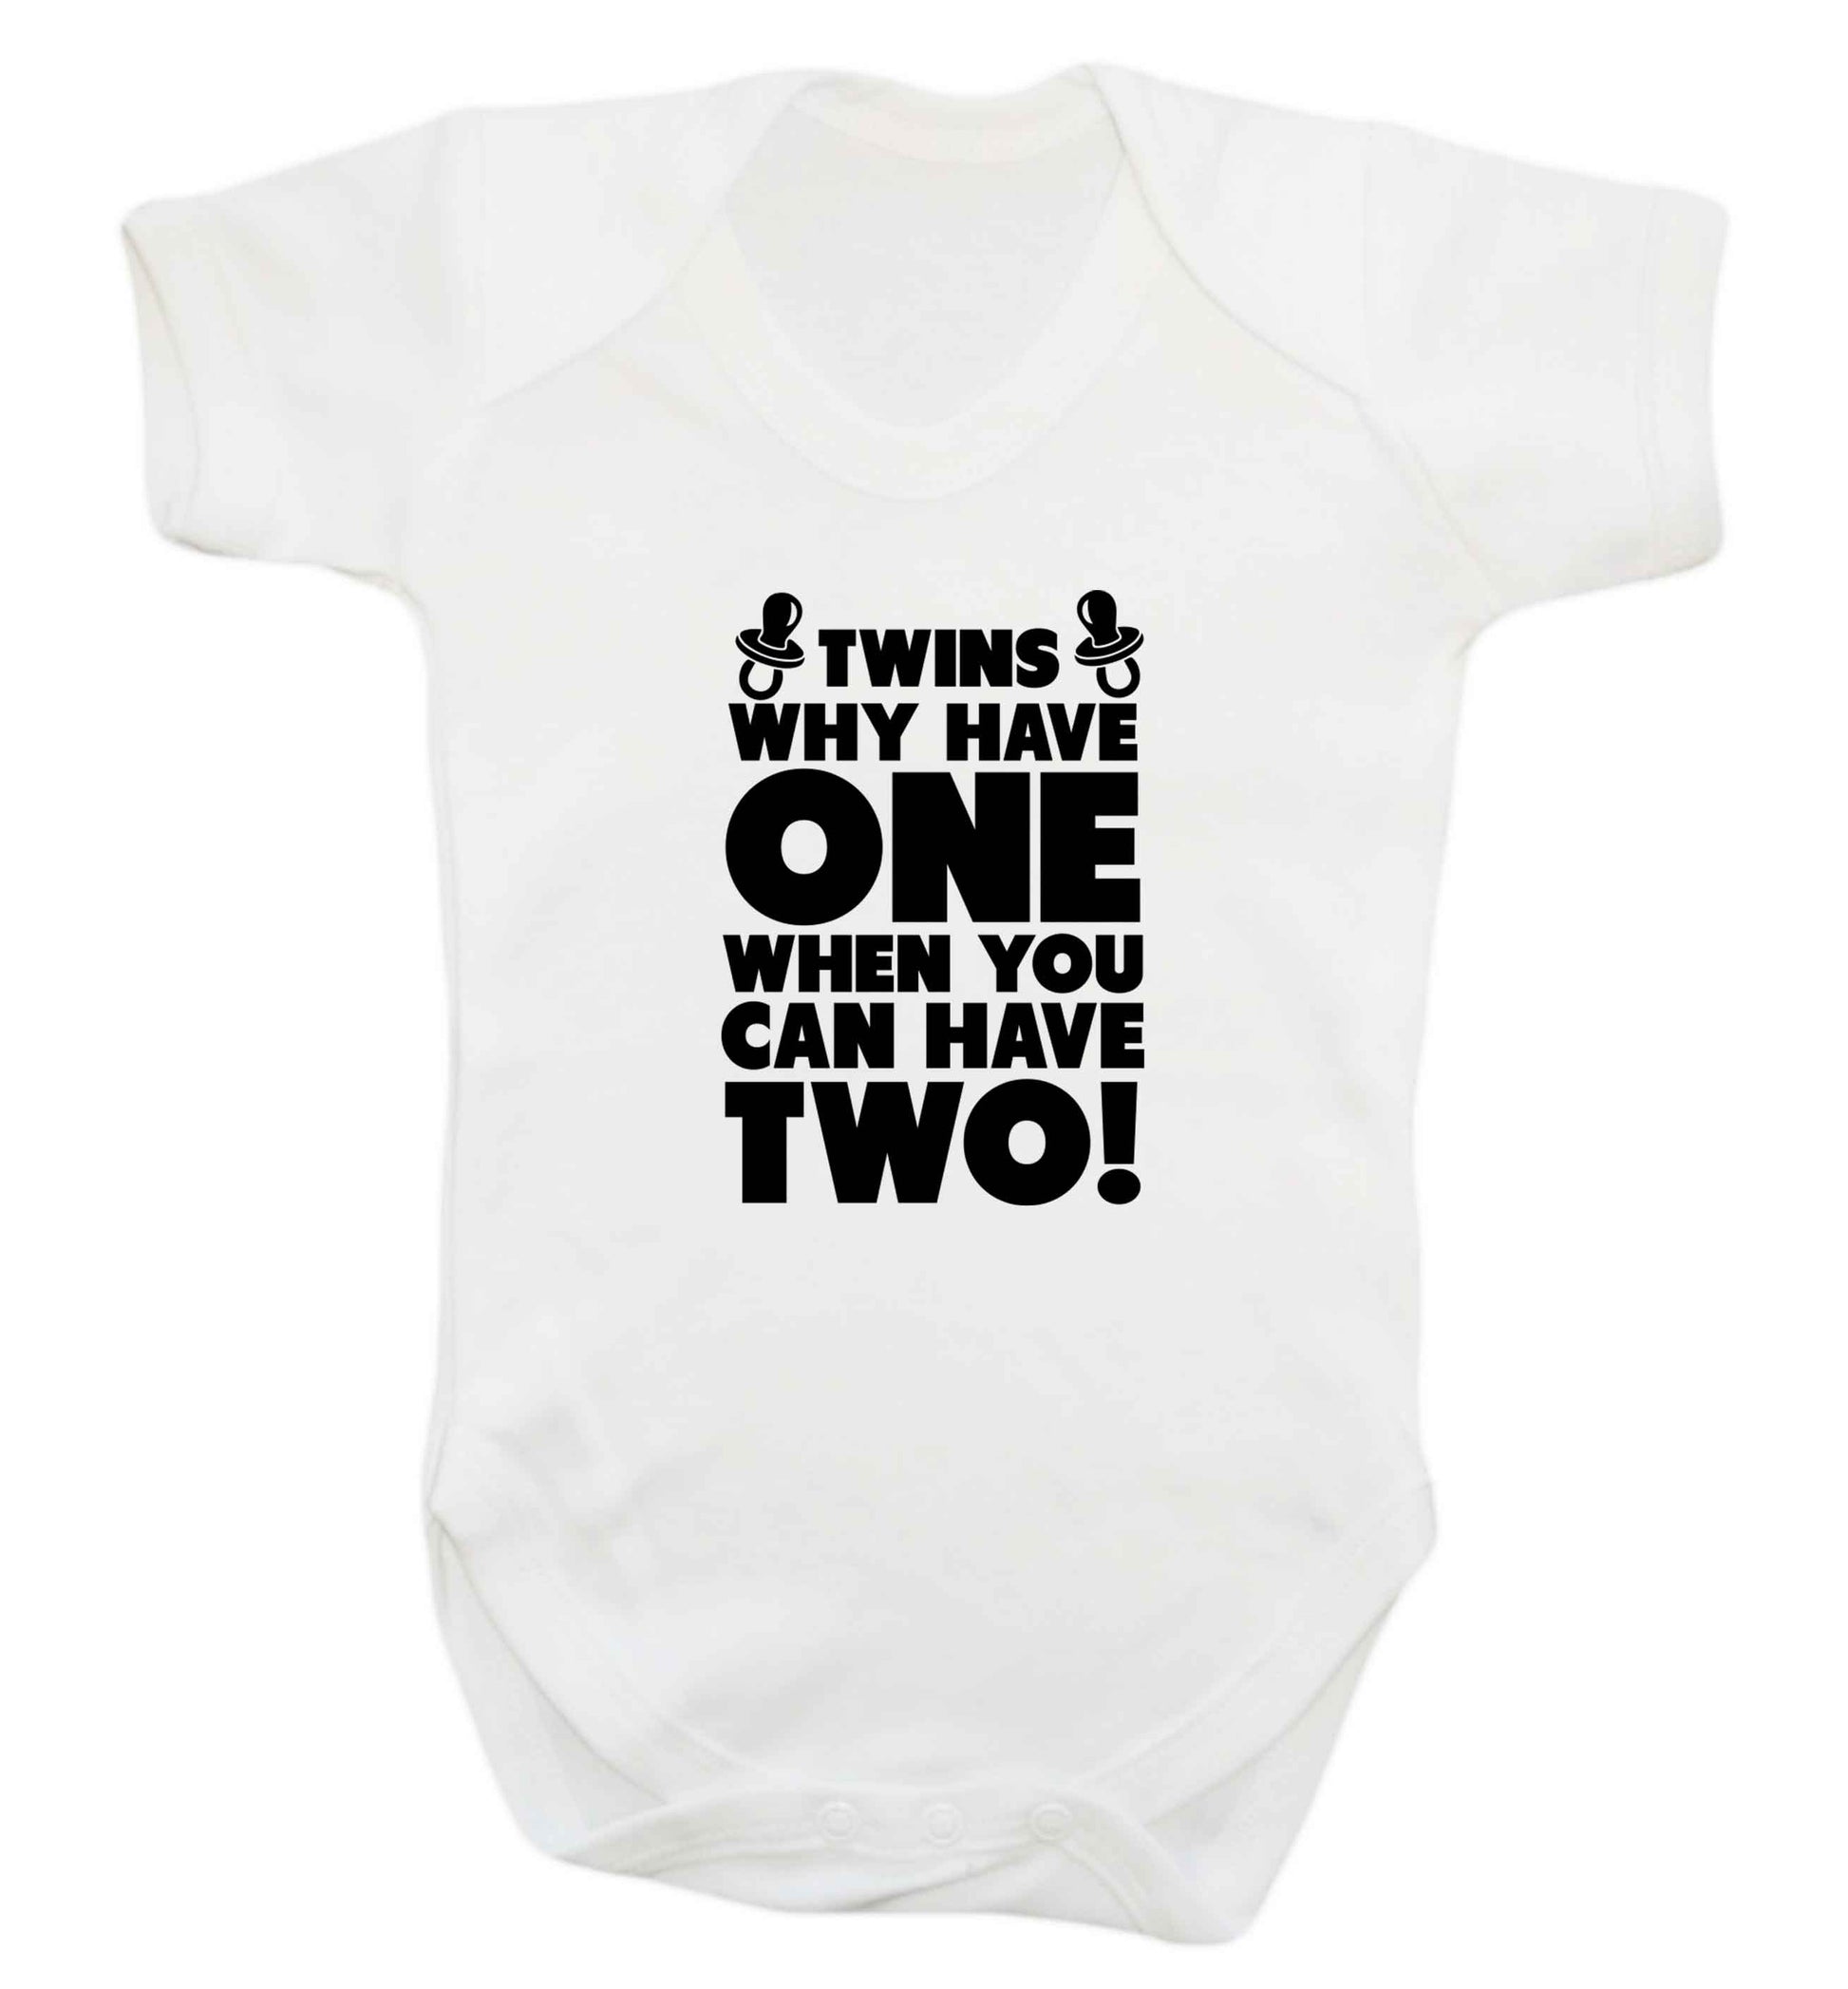 Twins why have one when you can have two baby vest white 18-24 months